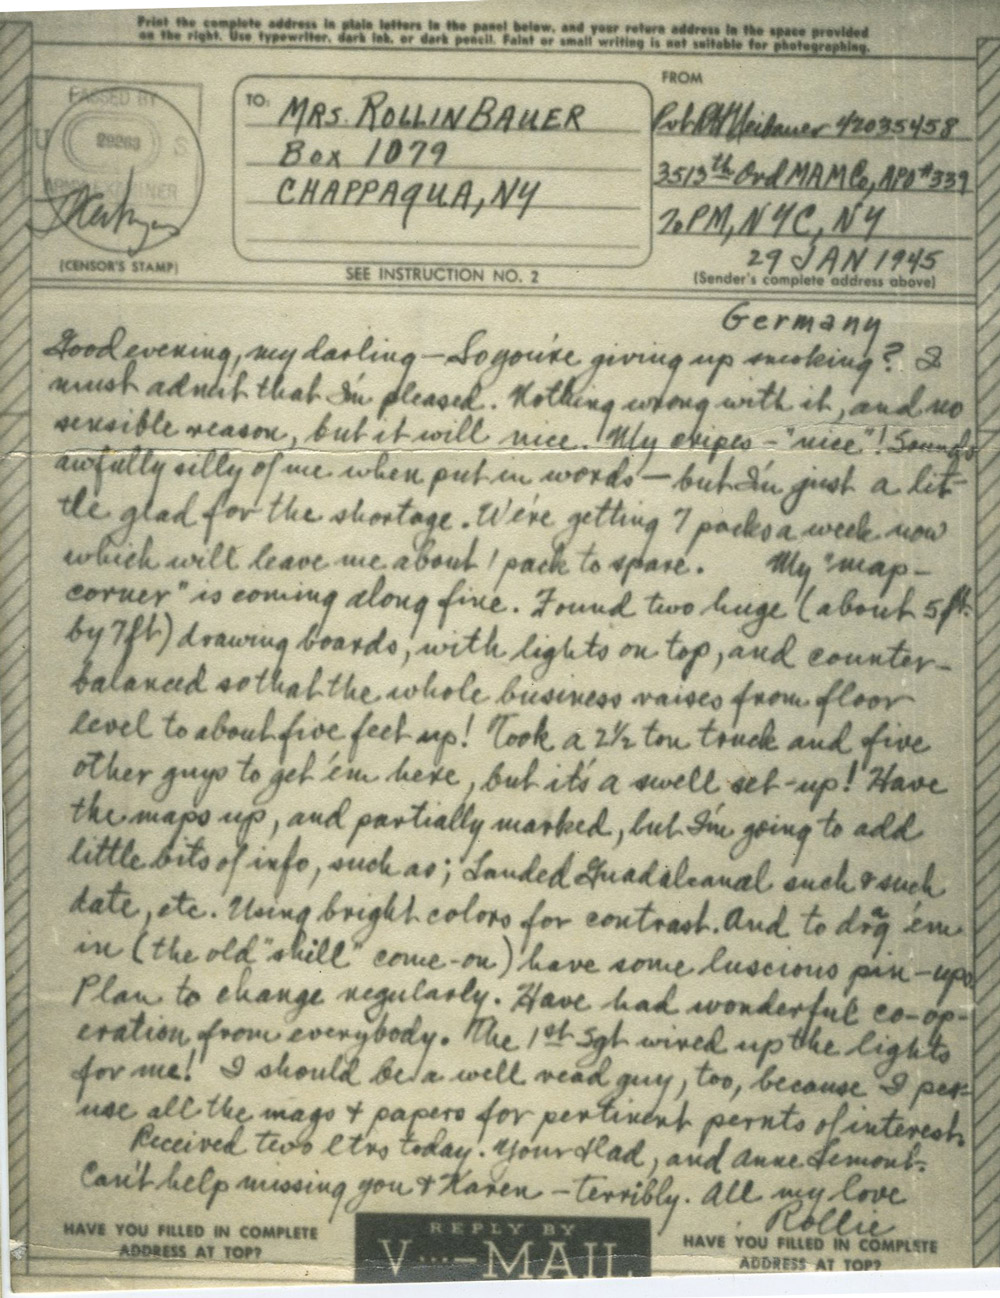 1-29-45-ww2-letters-mary-anne-erickson